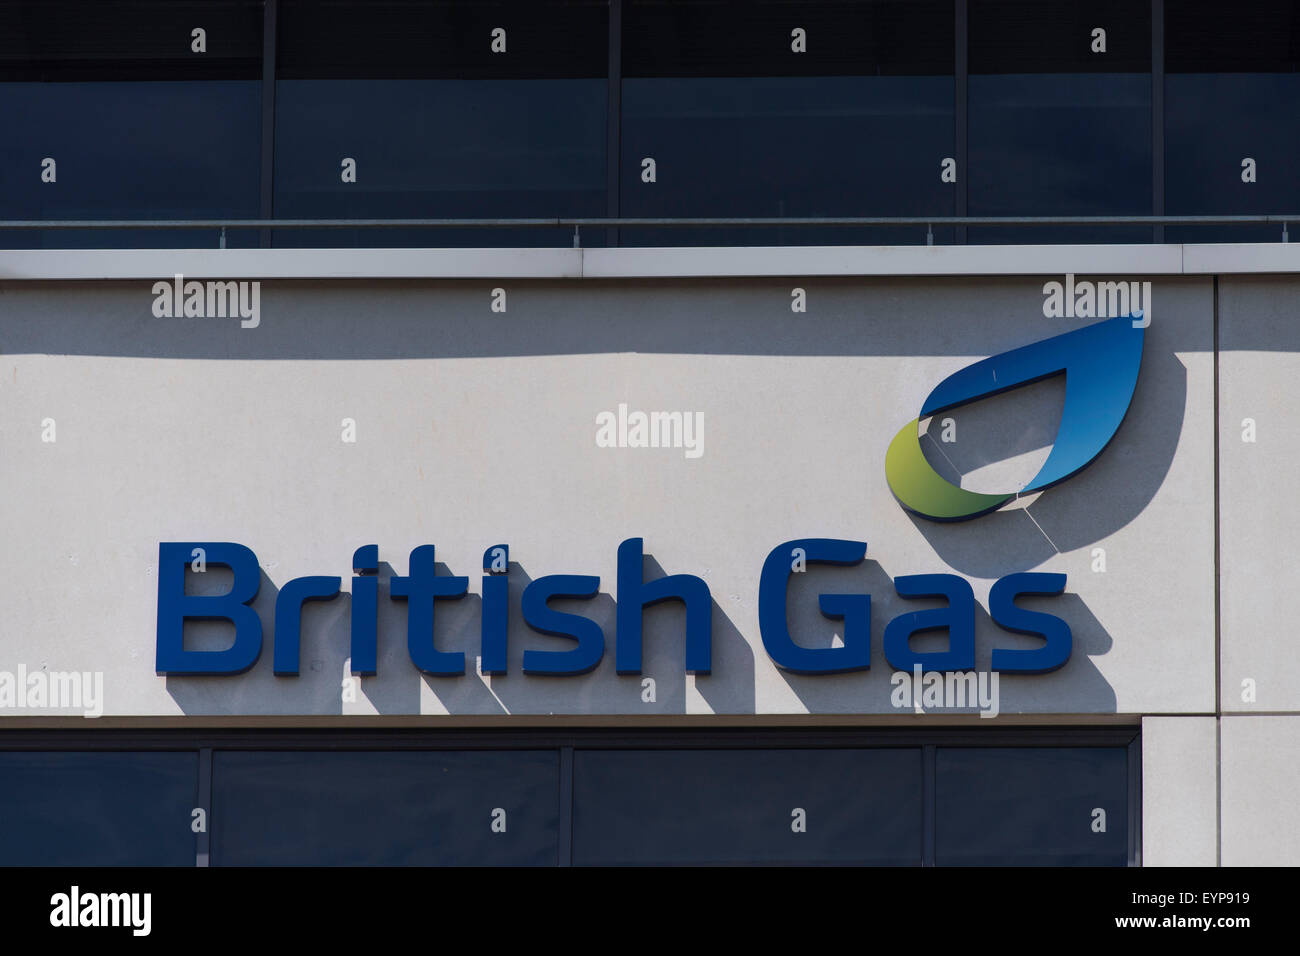 British Gas offices in Cardiff, Wales. British Gas is owned by Centrica and provides energy to millions of homes across the UK. Stock Photo